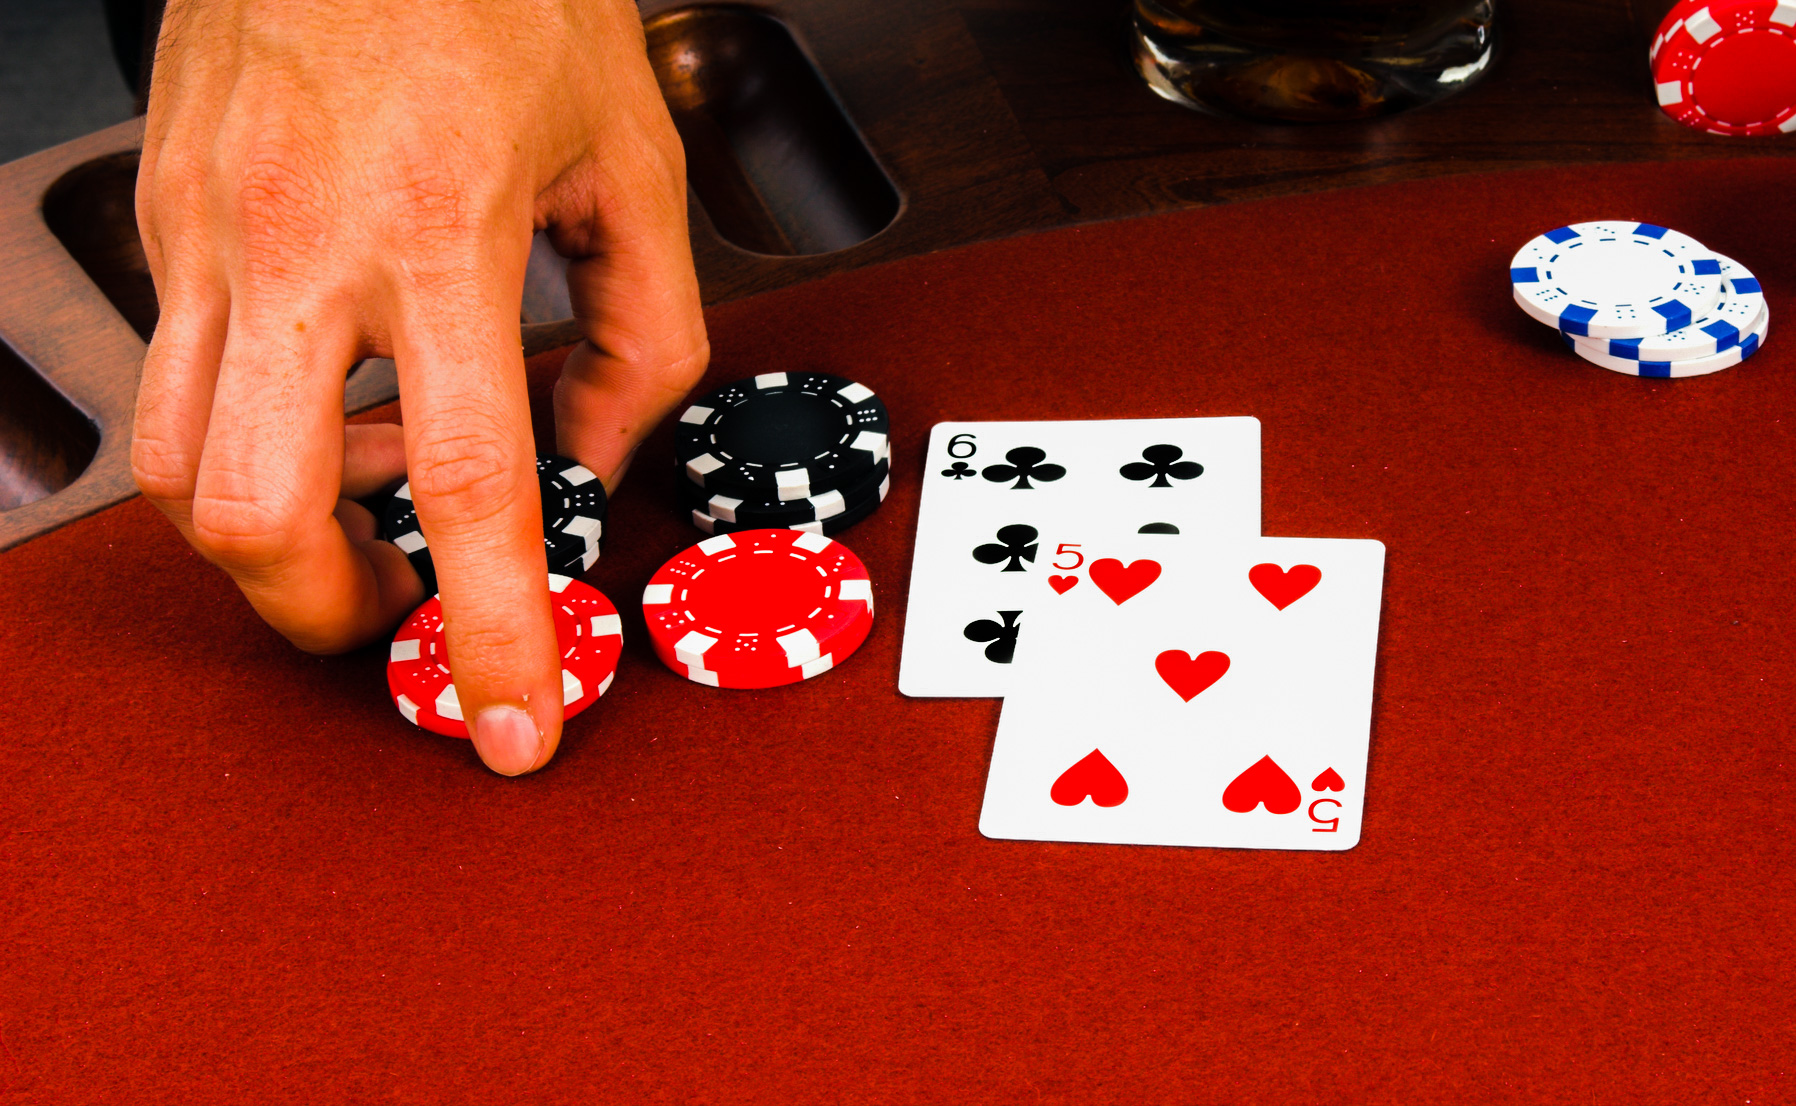 Close up detail of the hand of a man placing a double down bet in a blackjack game in Las Vegas